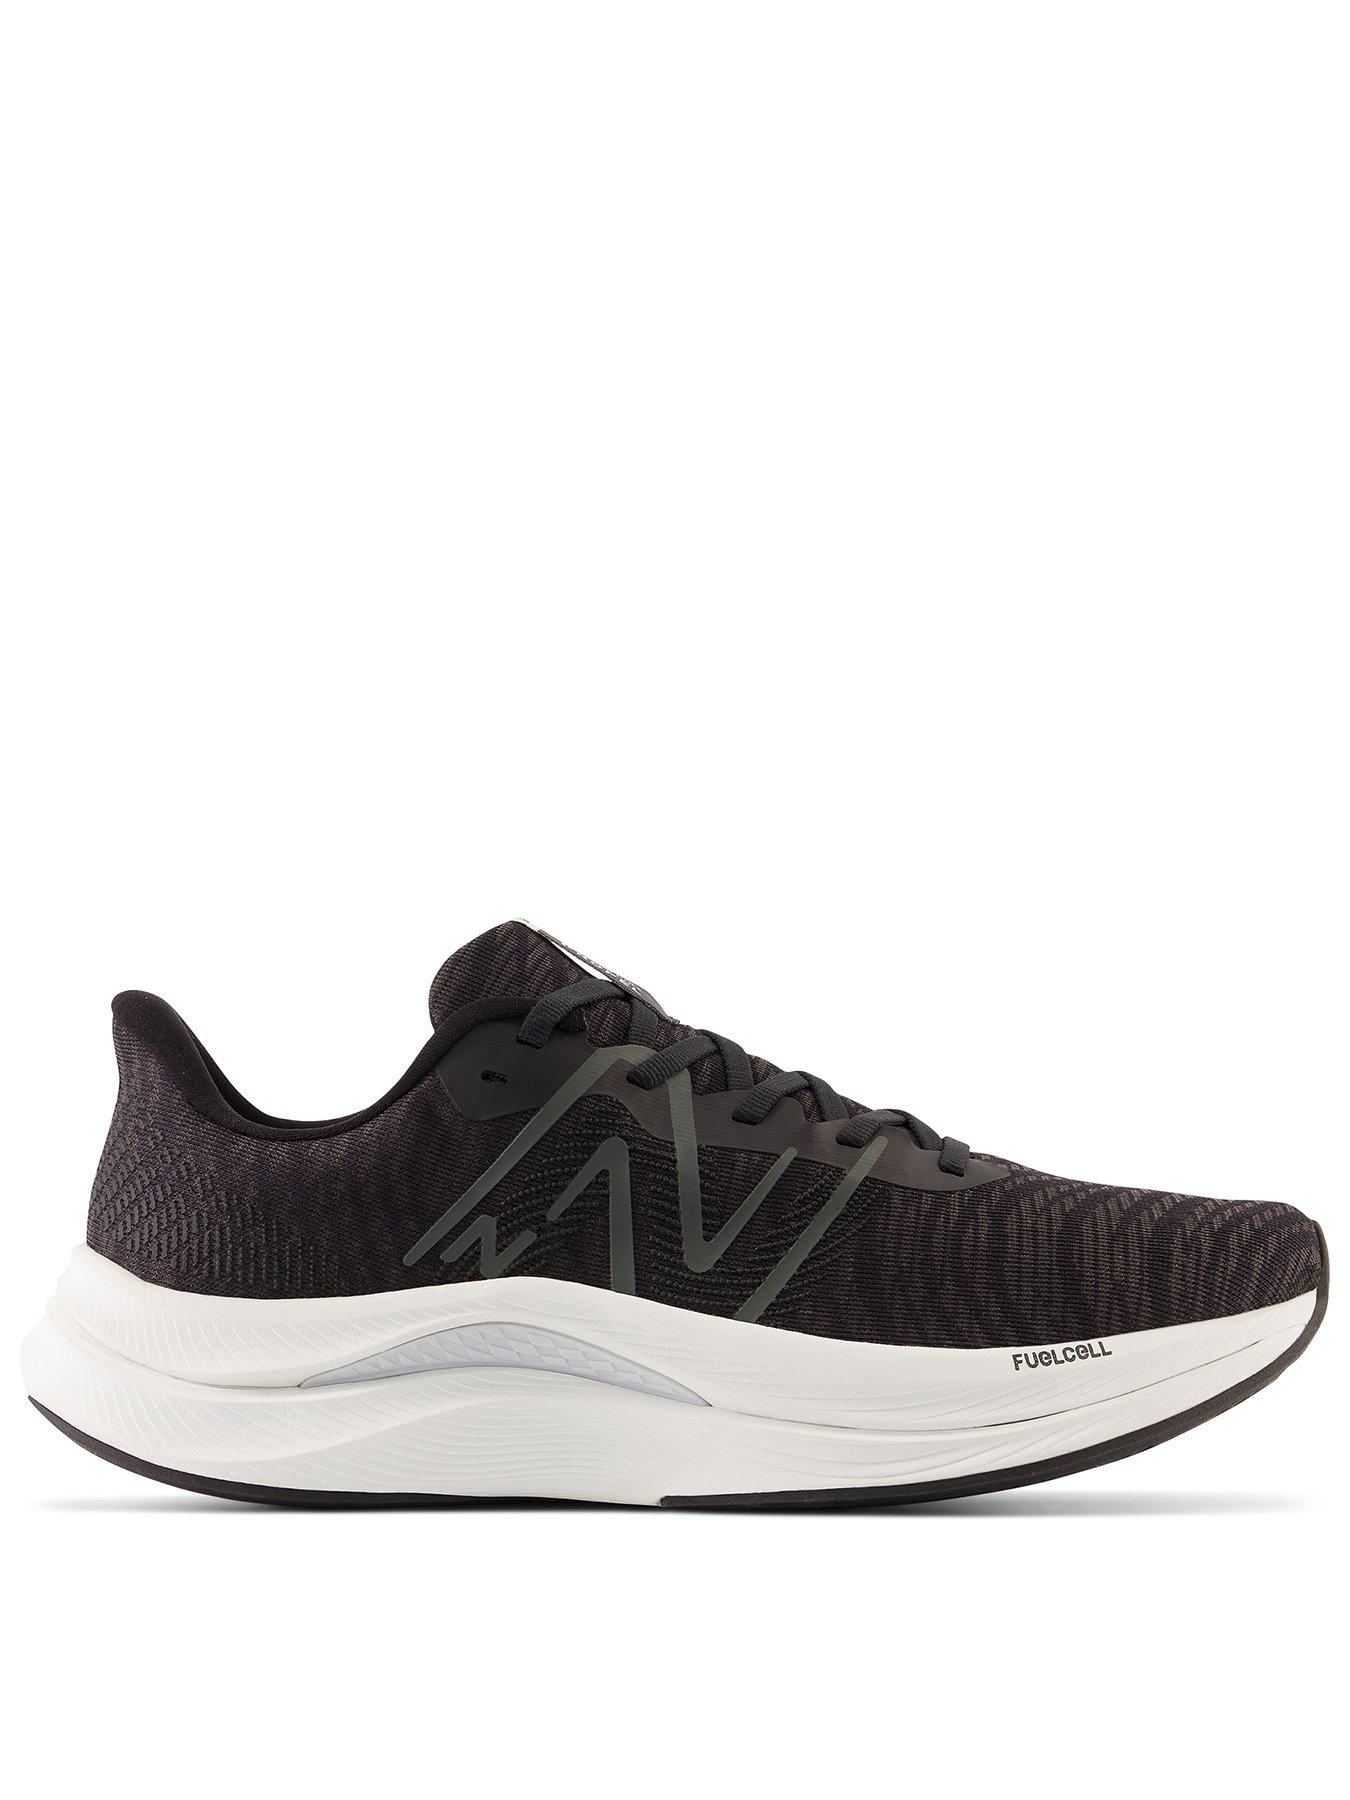 New Balance Mens Running Fuelcell Propel V4 Trainers - Black | very.co.uk